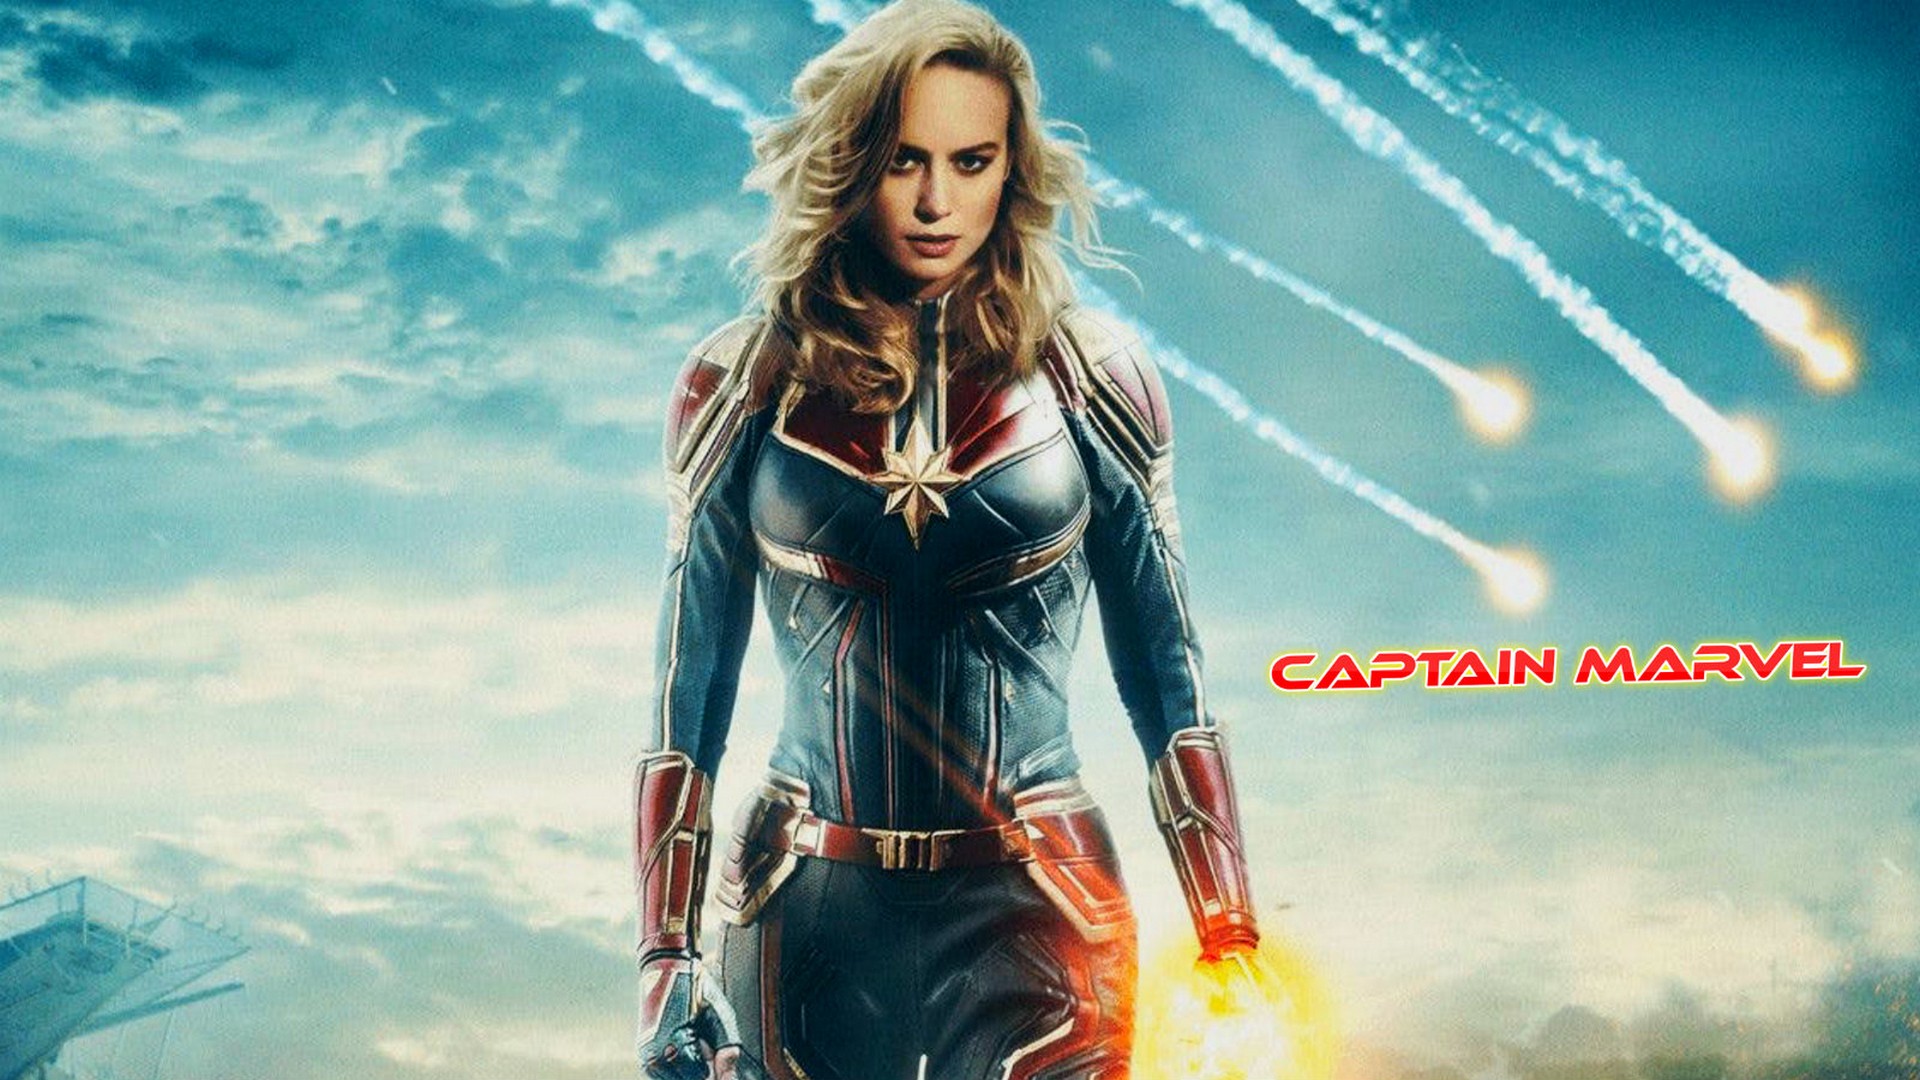 Wallpaper Hd Captain Marvel 2019 With High-resolution - Captain Marvel - HD Wallpaper 